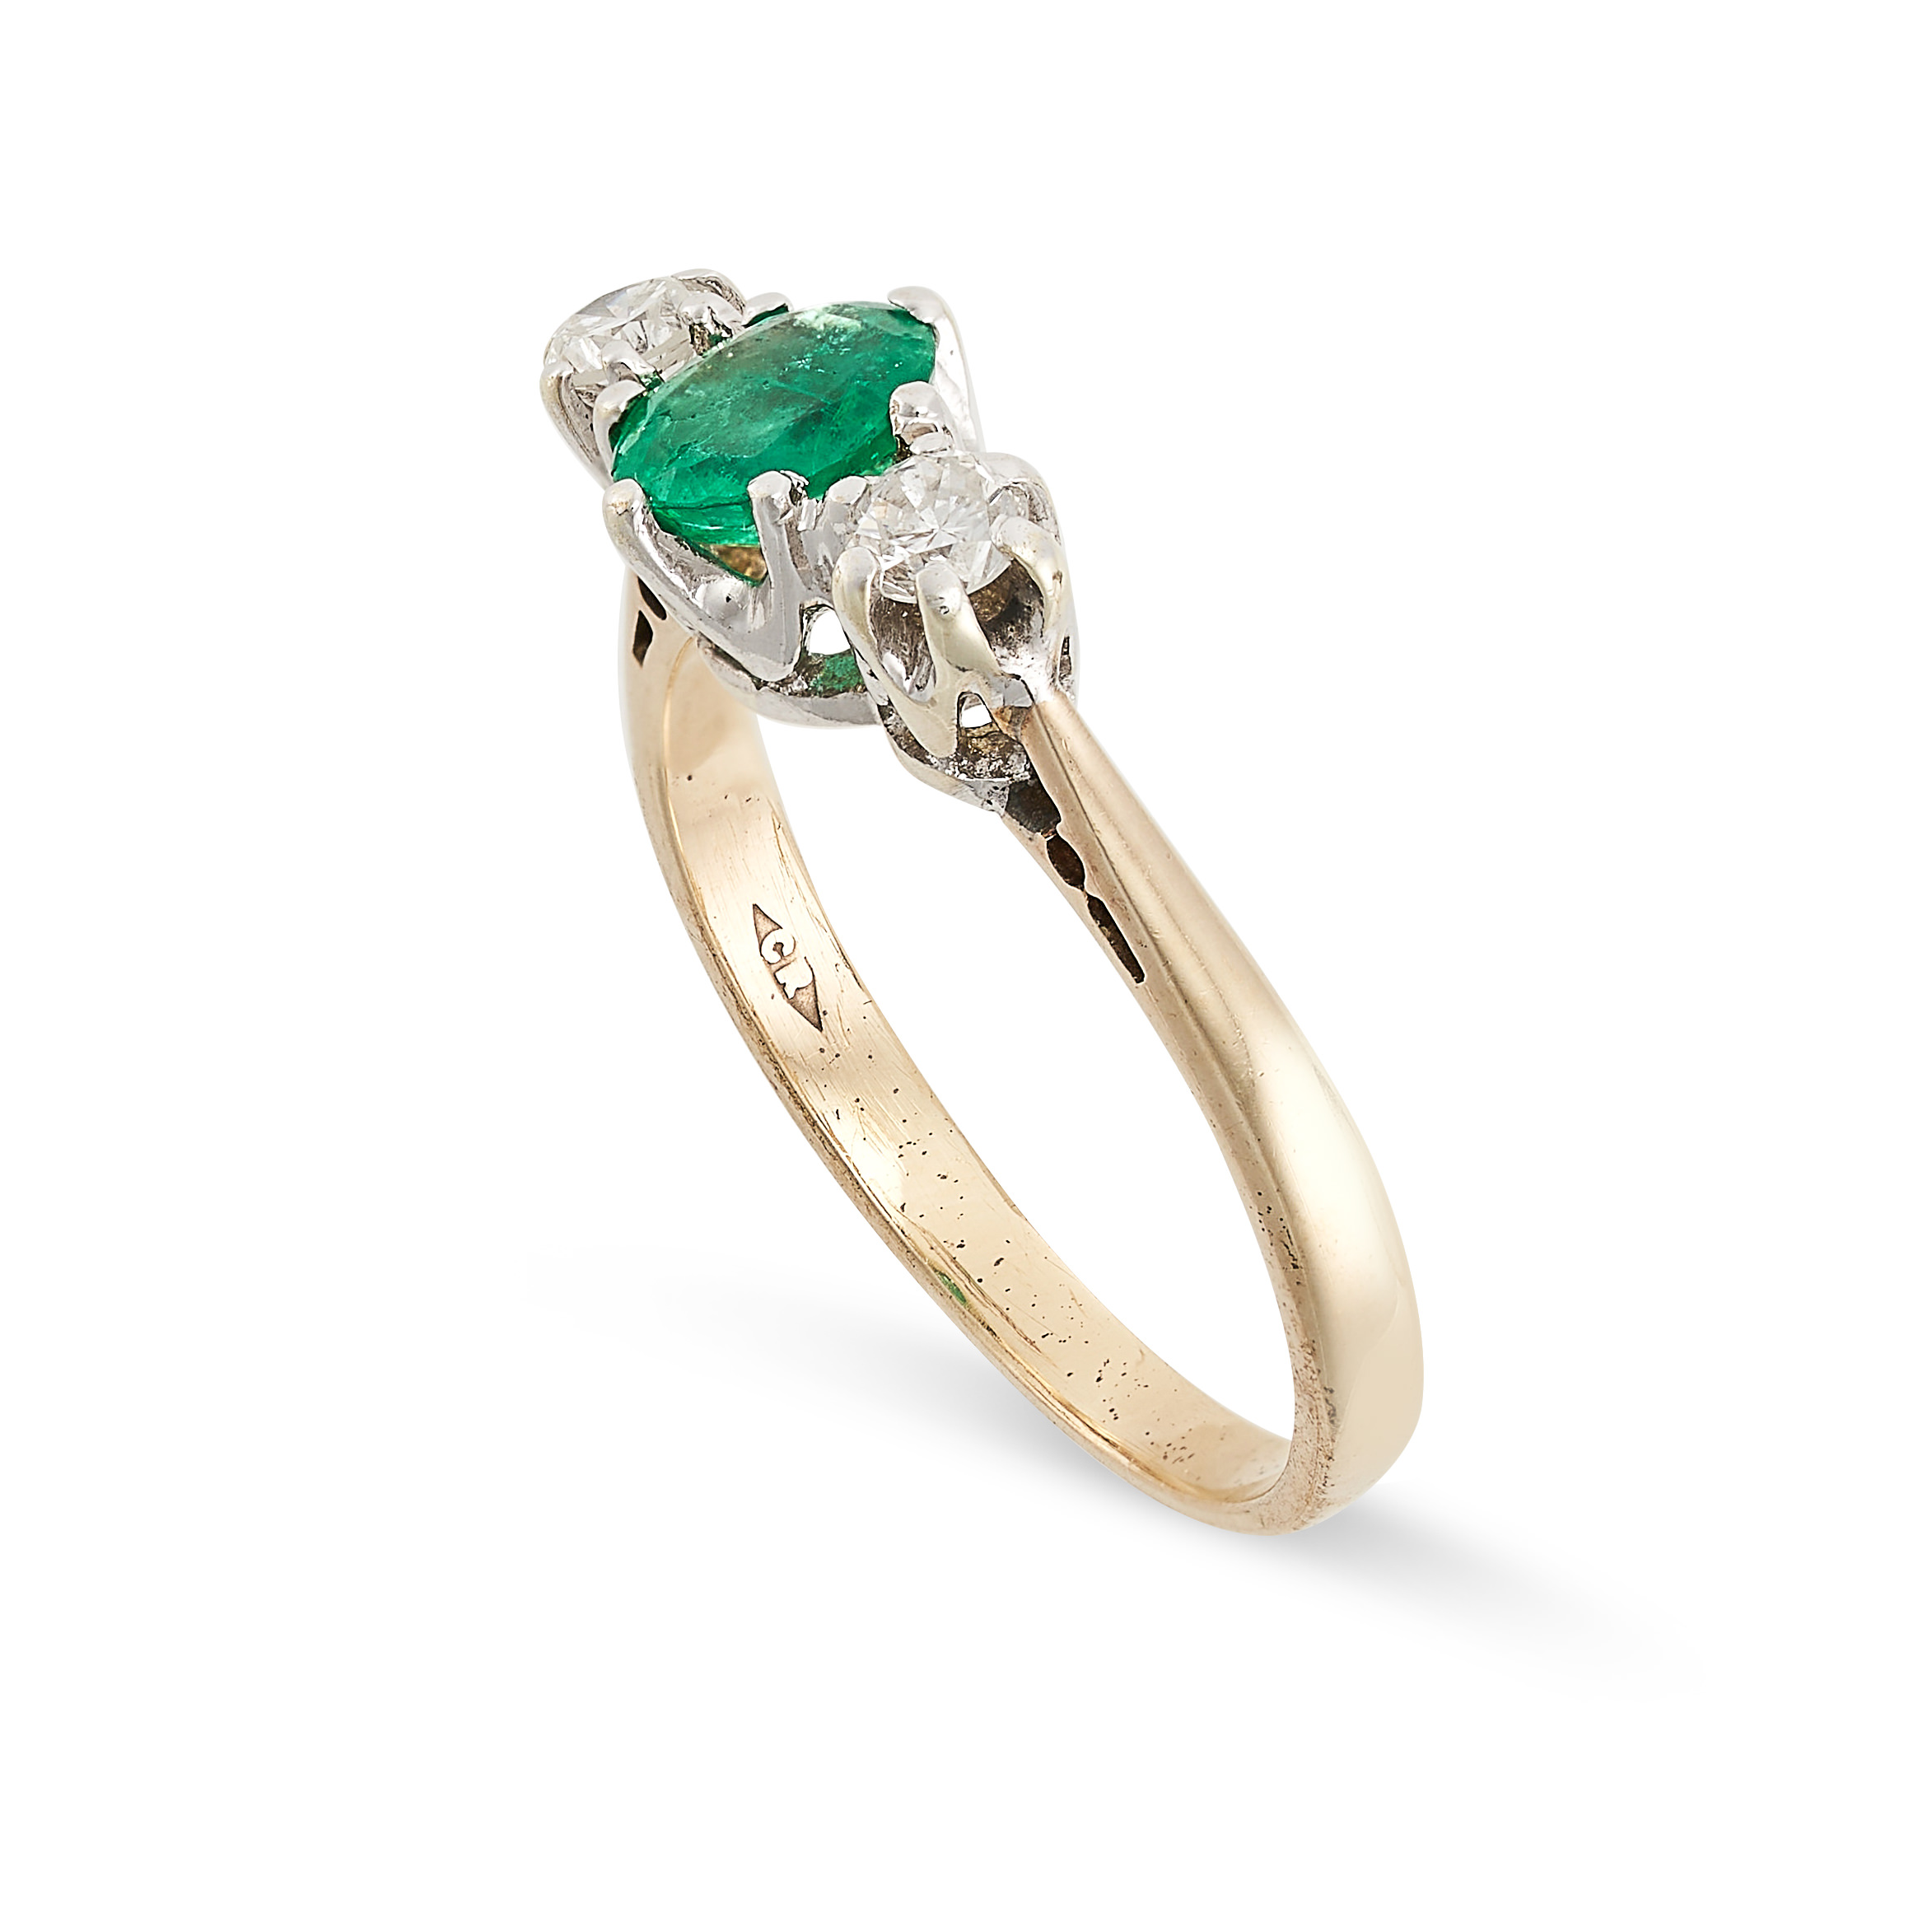 AN EMERALD AND DIAMOND THREE STONE RING in 9ct yellow gold, set with an oval cut emerald between two - Image 2 of 2